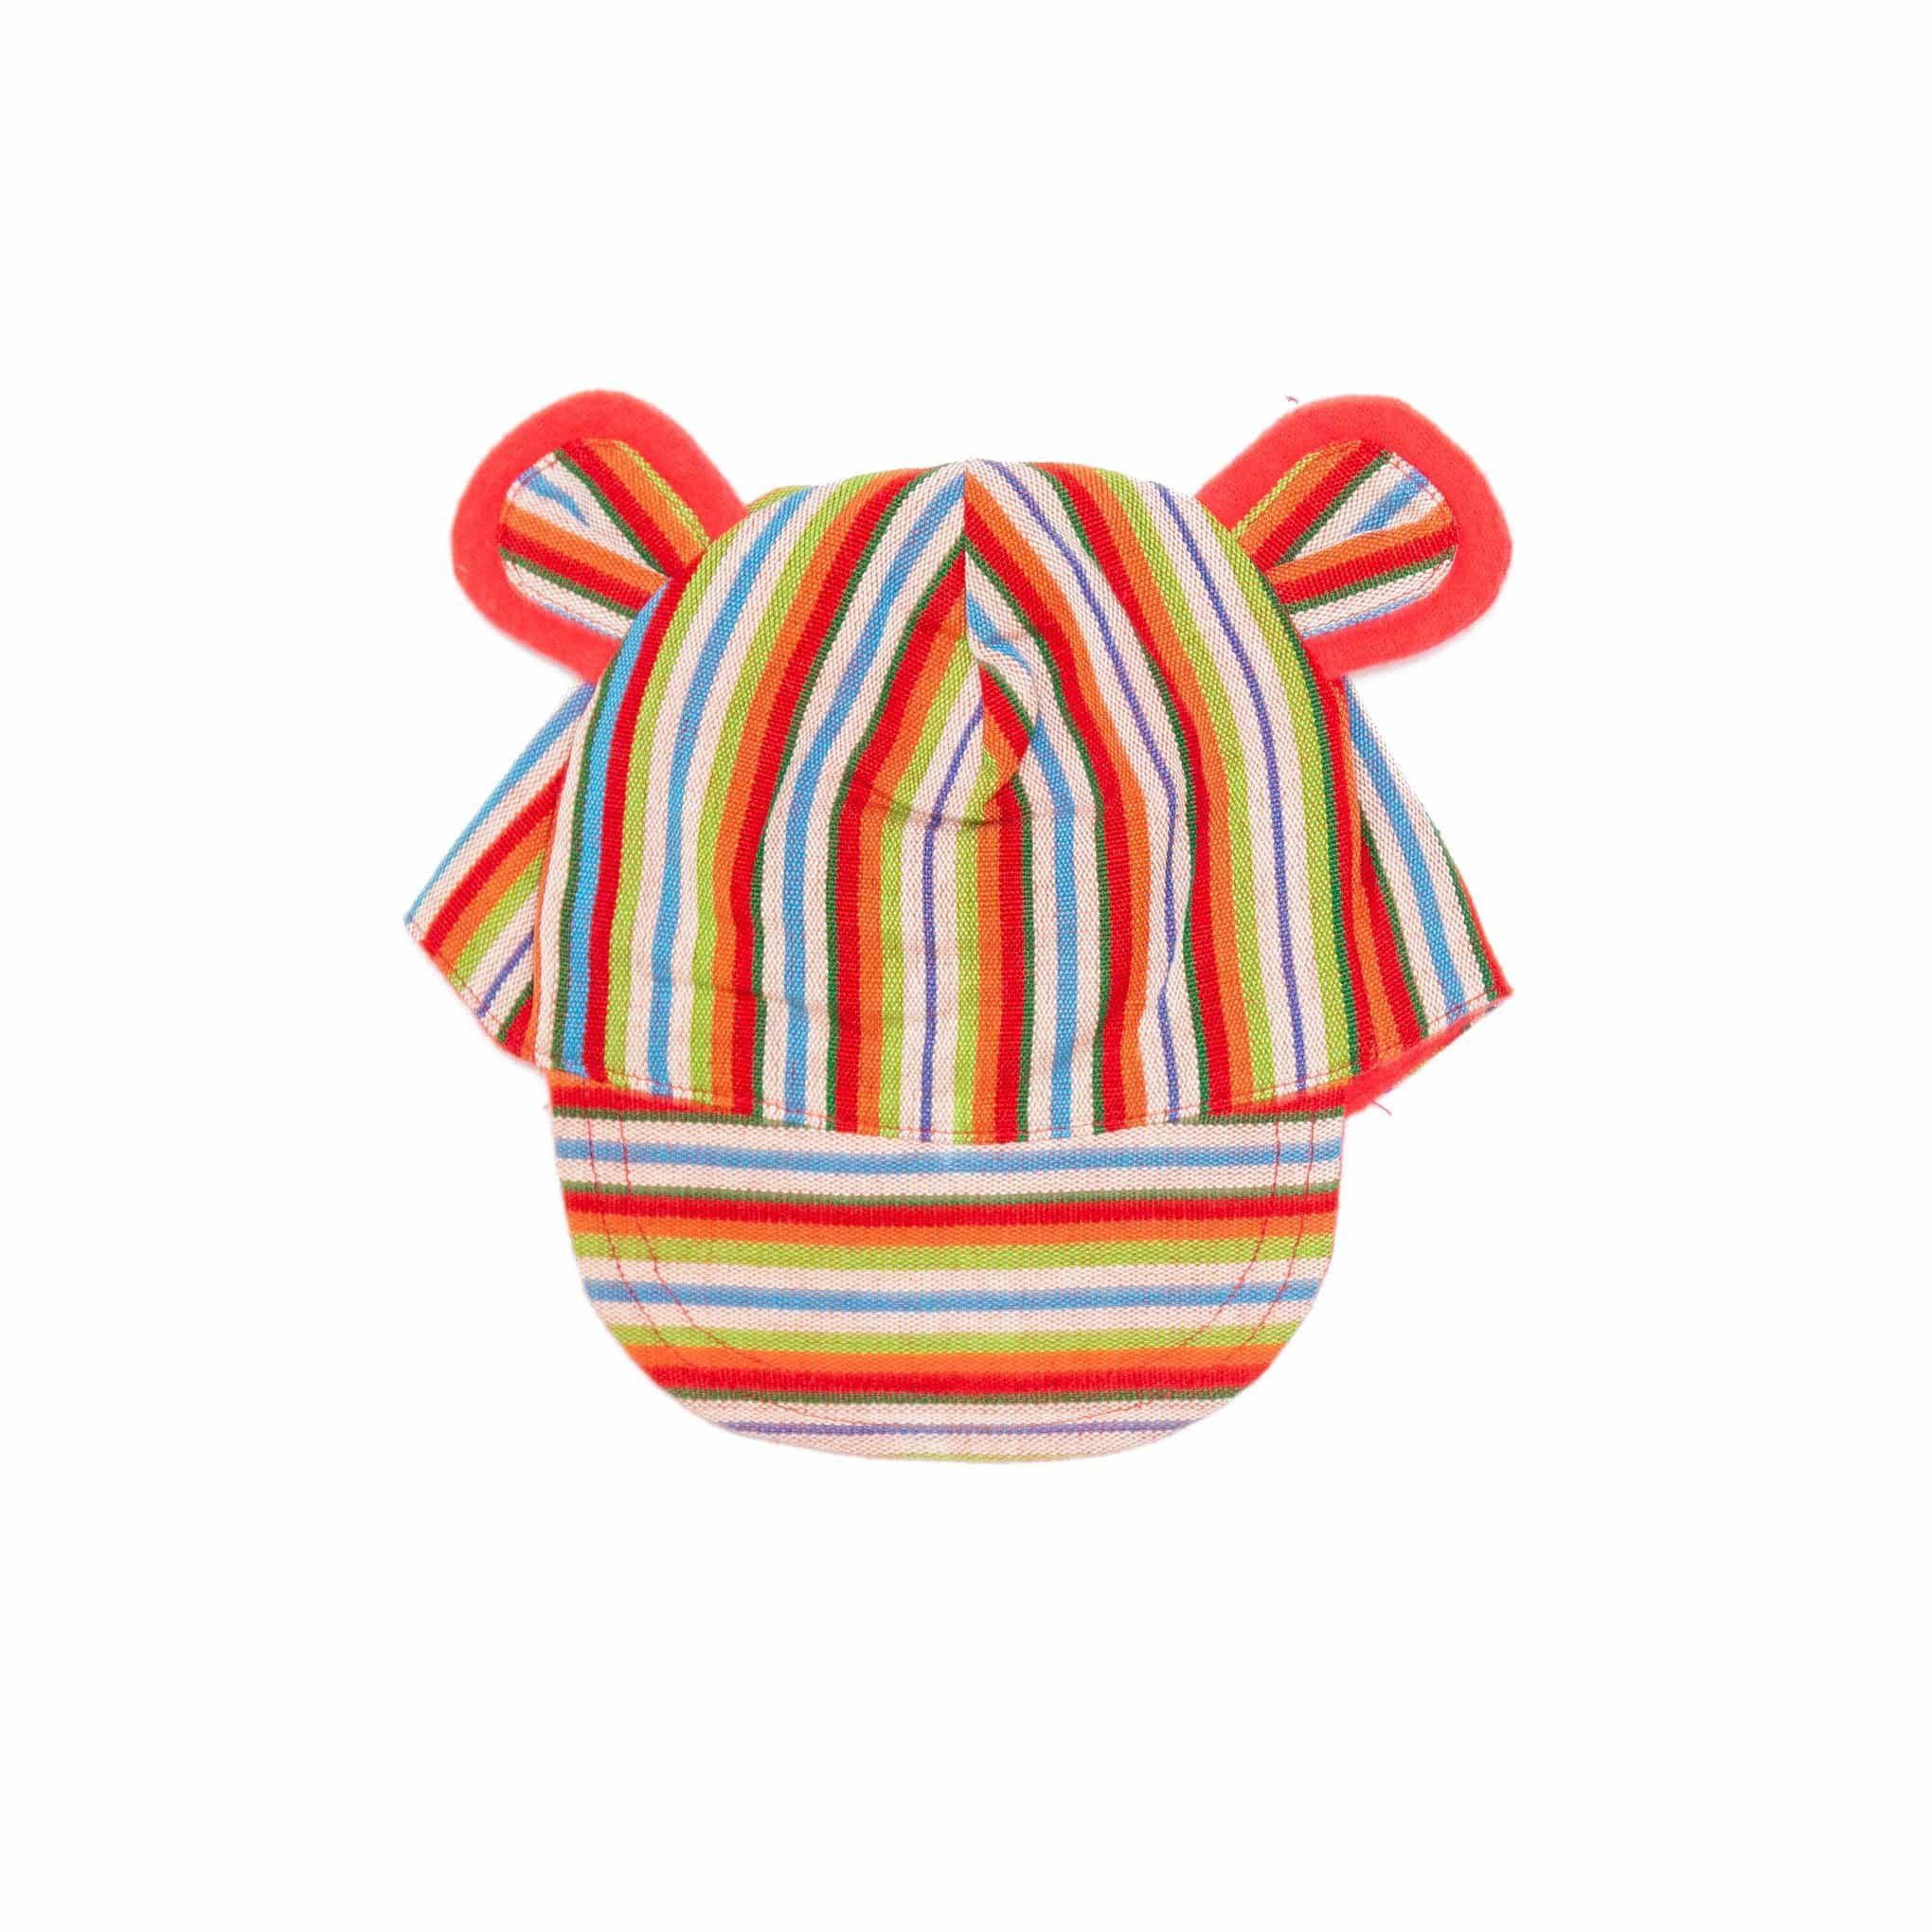 Keep your little one cozy and stylish with this handmade Baby Bear Hat. Made of 100% cotton and produced in accordance with fair trade principles, this hat ensures warmth and comfort while promoting ethical production practices.